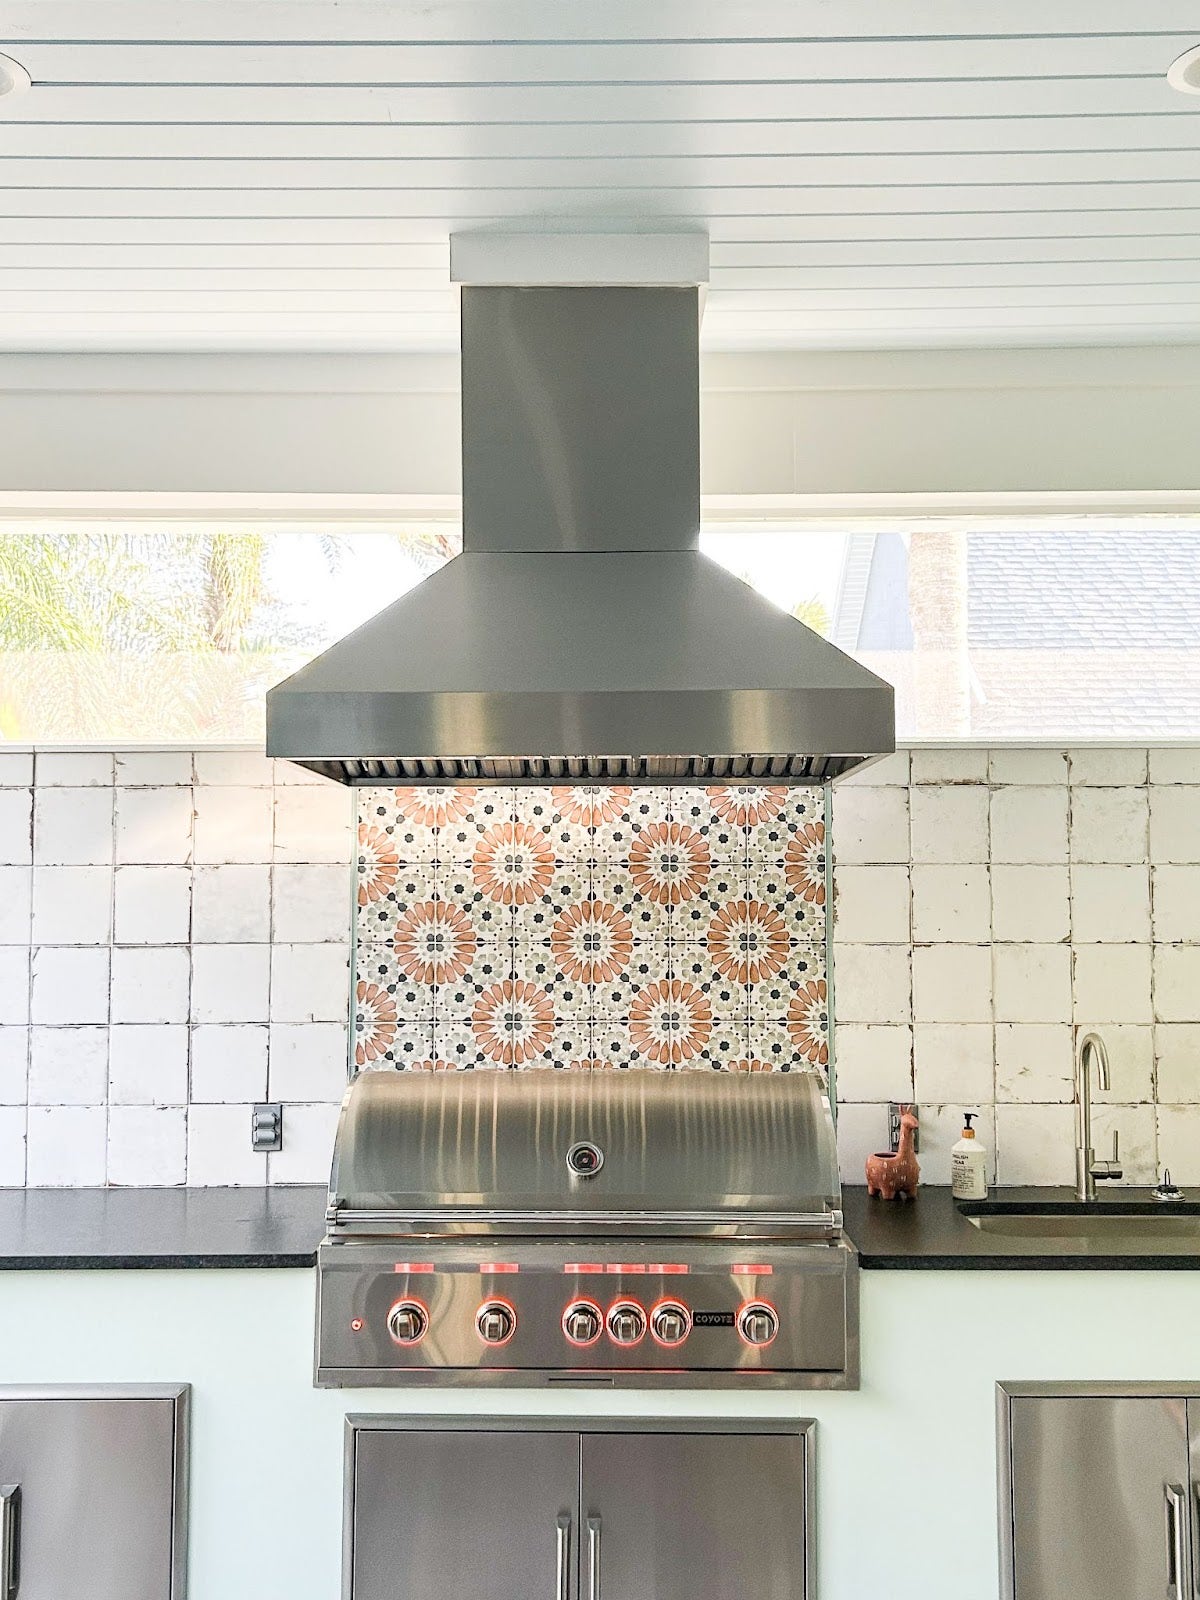 Vibrant outdoor kitchen featuring a Proline range hood, with a decorative tile backsplash and a stainless steel grill, providing a festive cooking experience - prolinerangehoods.com.